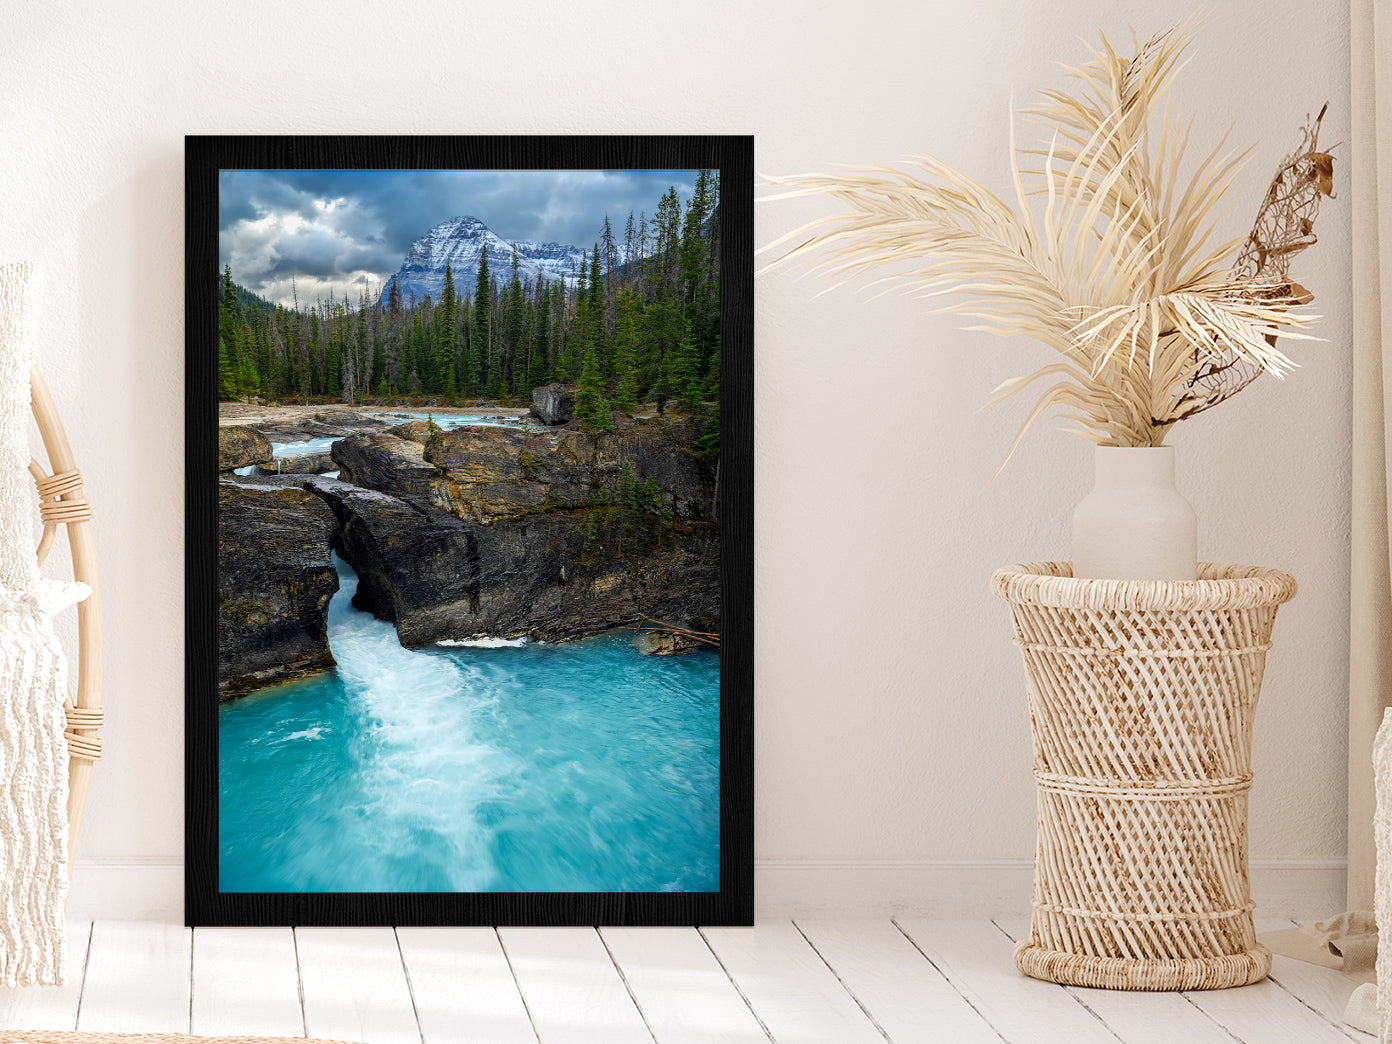 River Flows Down From Mountains Glass Framed Wall Art, Ready to Hang Quality Print Without White Border Black